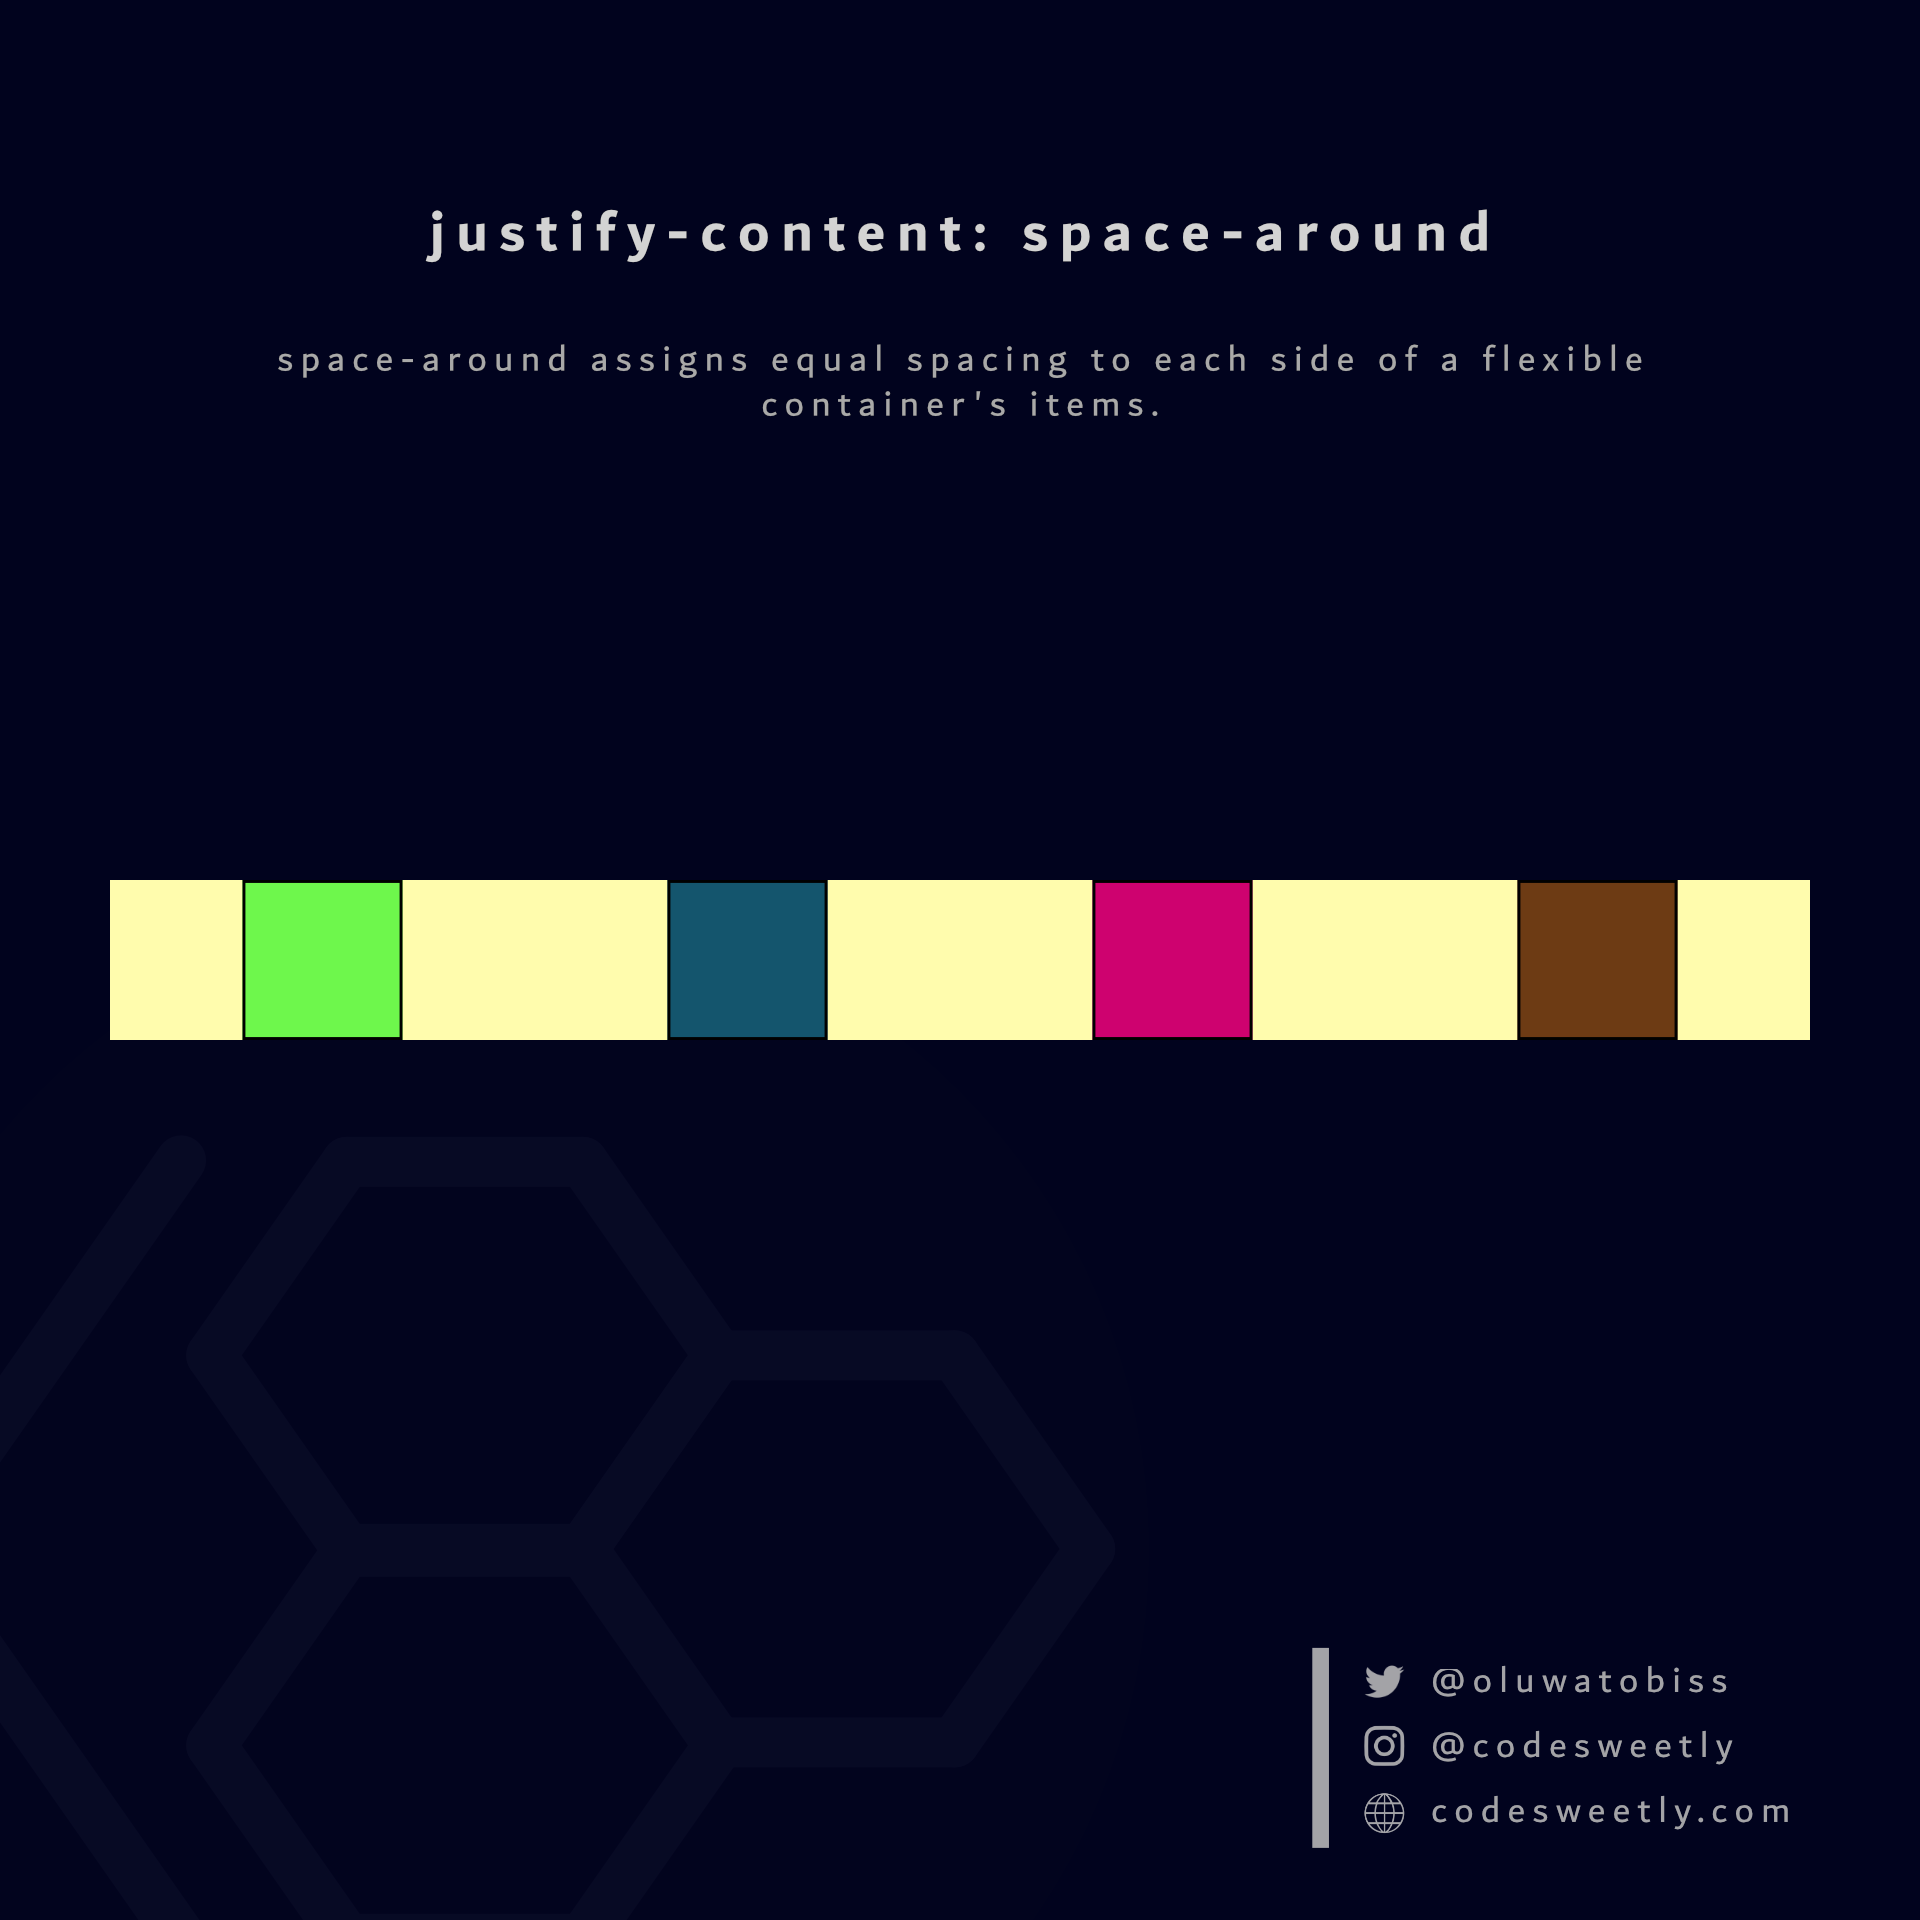 Illustration of justify-content&#39;s space-around value